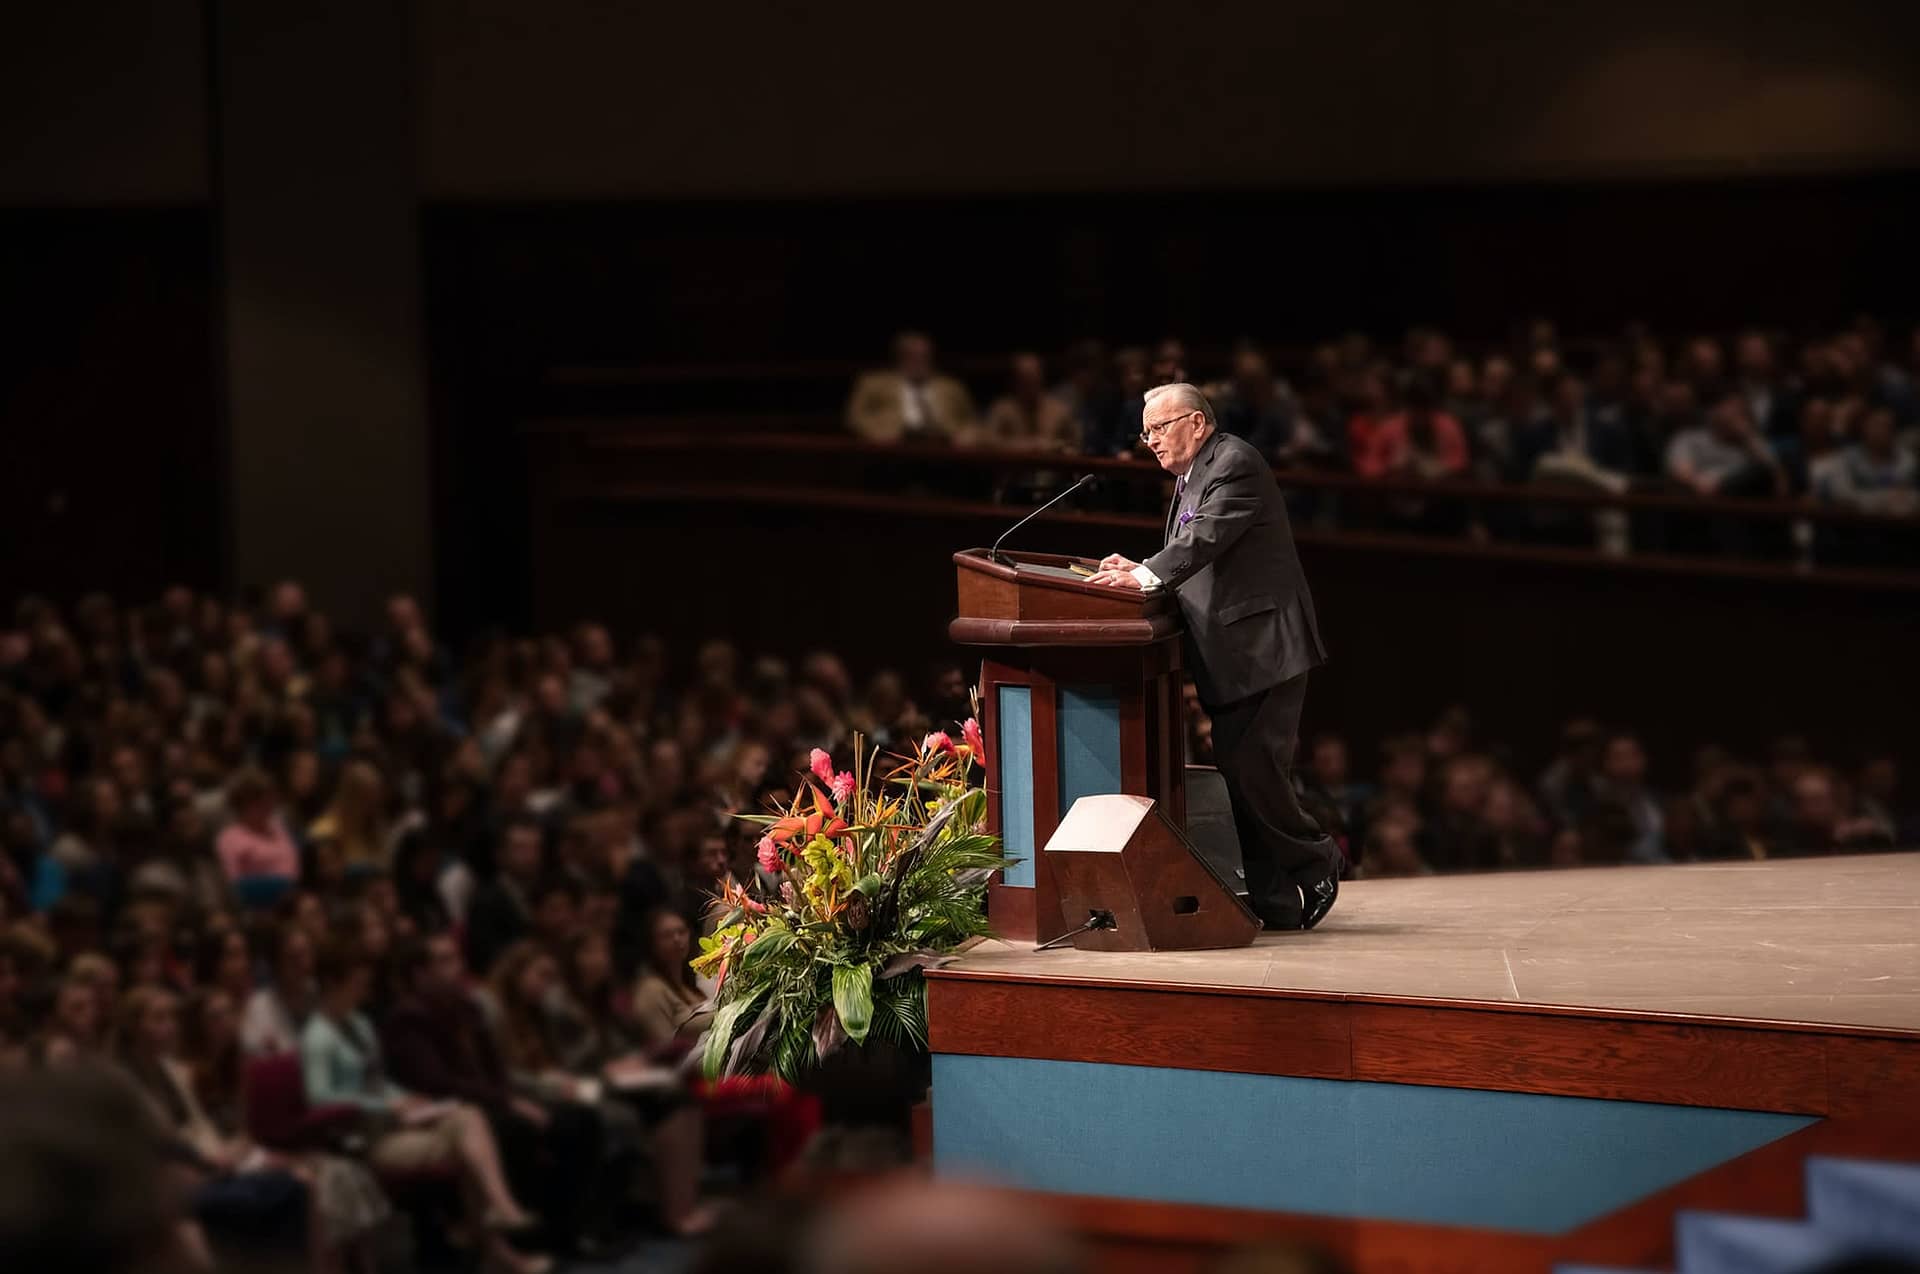 Raymond Barber preaching at Bible Conference